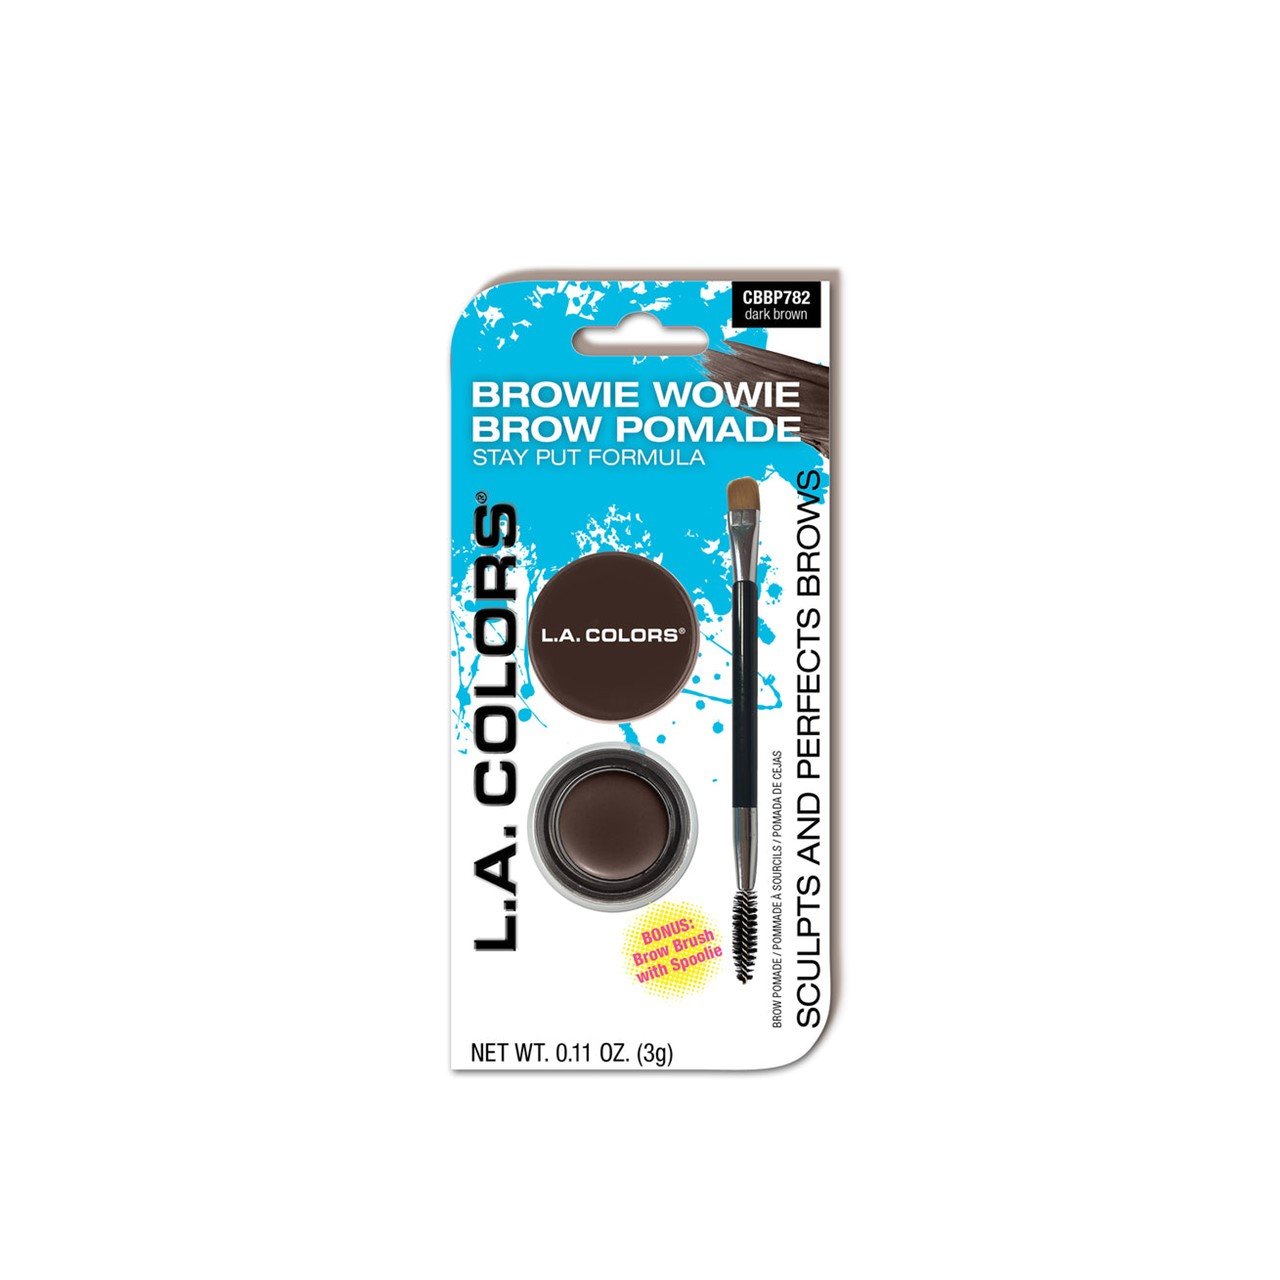 L.A. Colors Browie Wowie Brow Pomade CBBP782 Dark Brown 3g (0.11 oz)